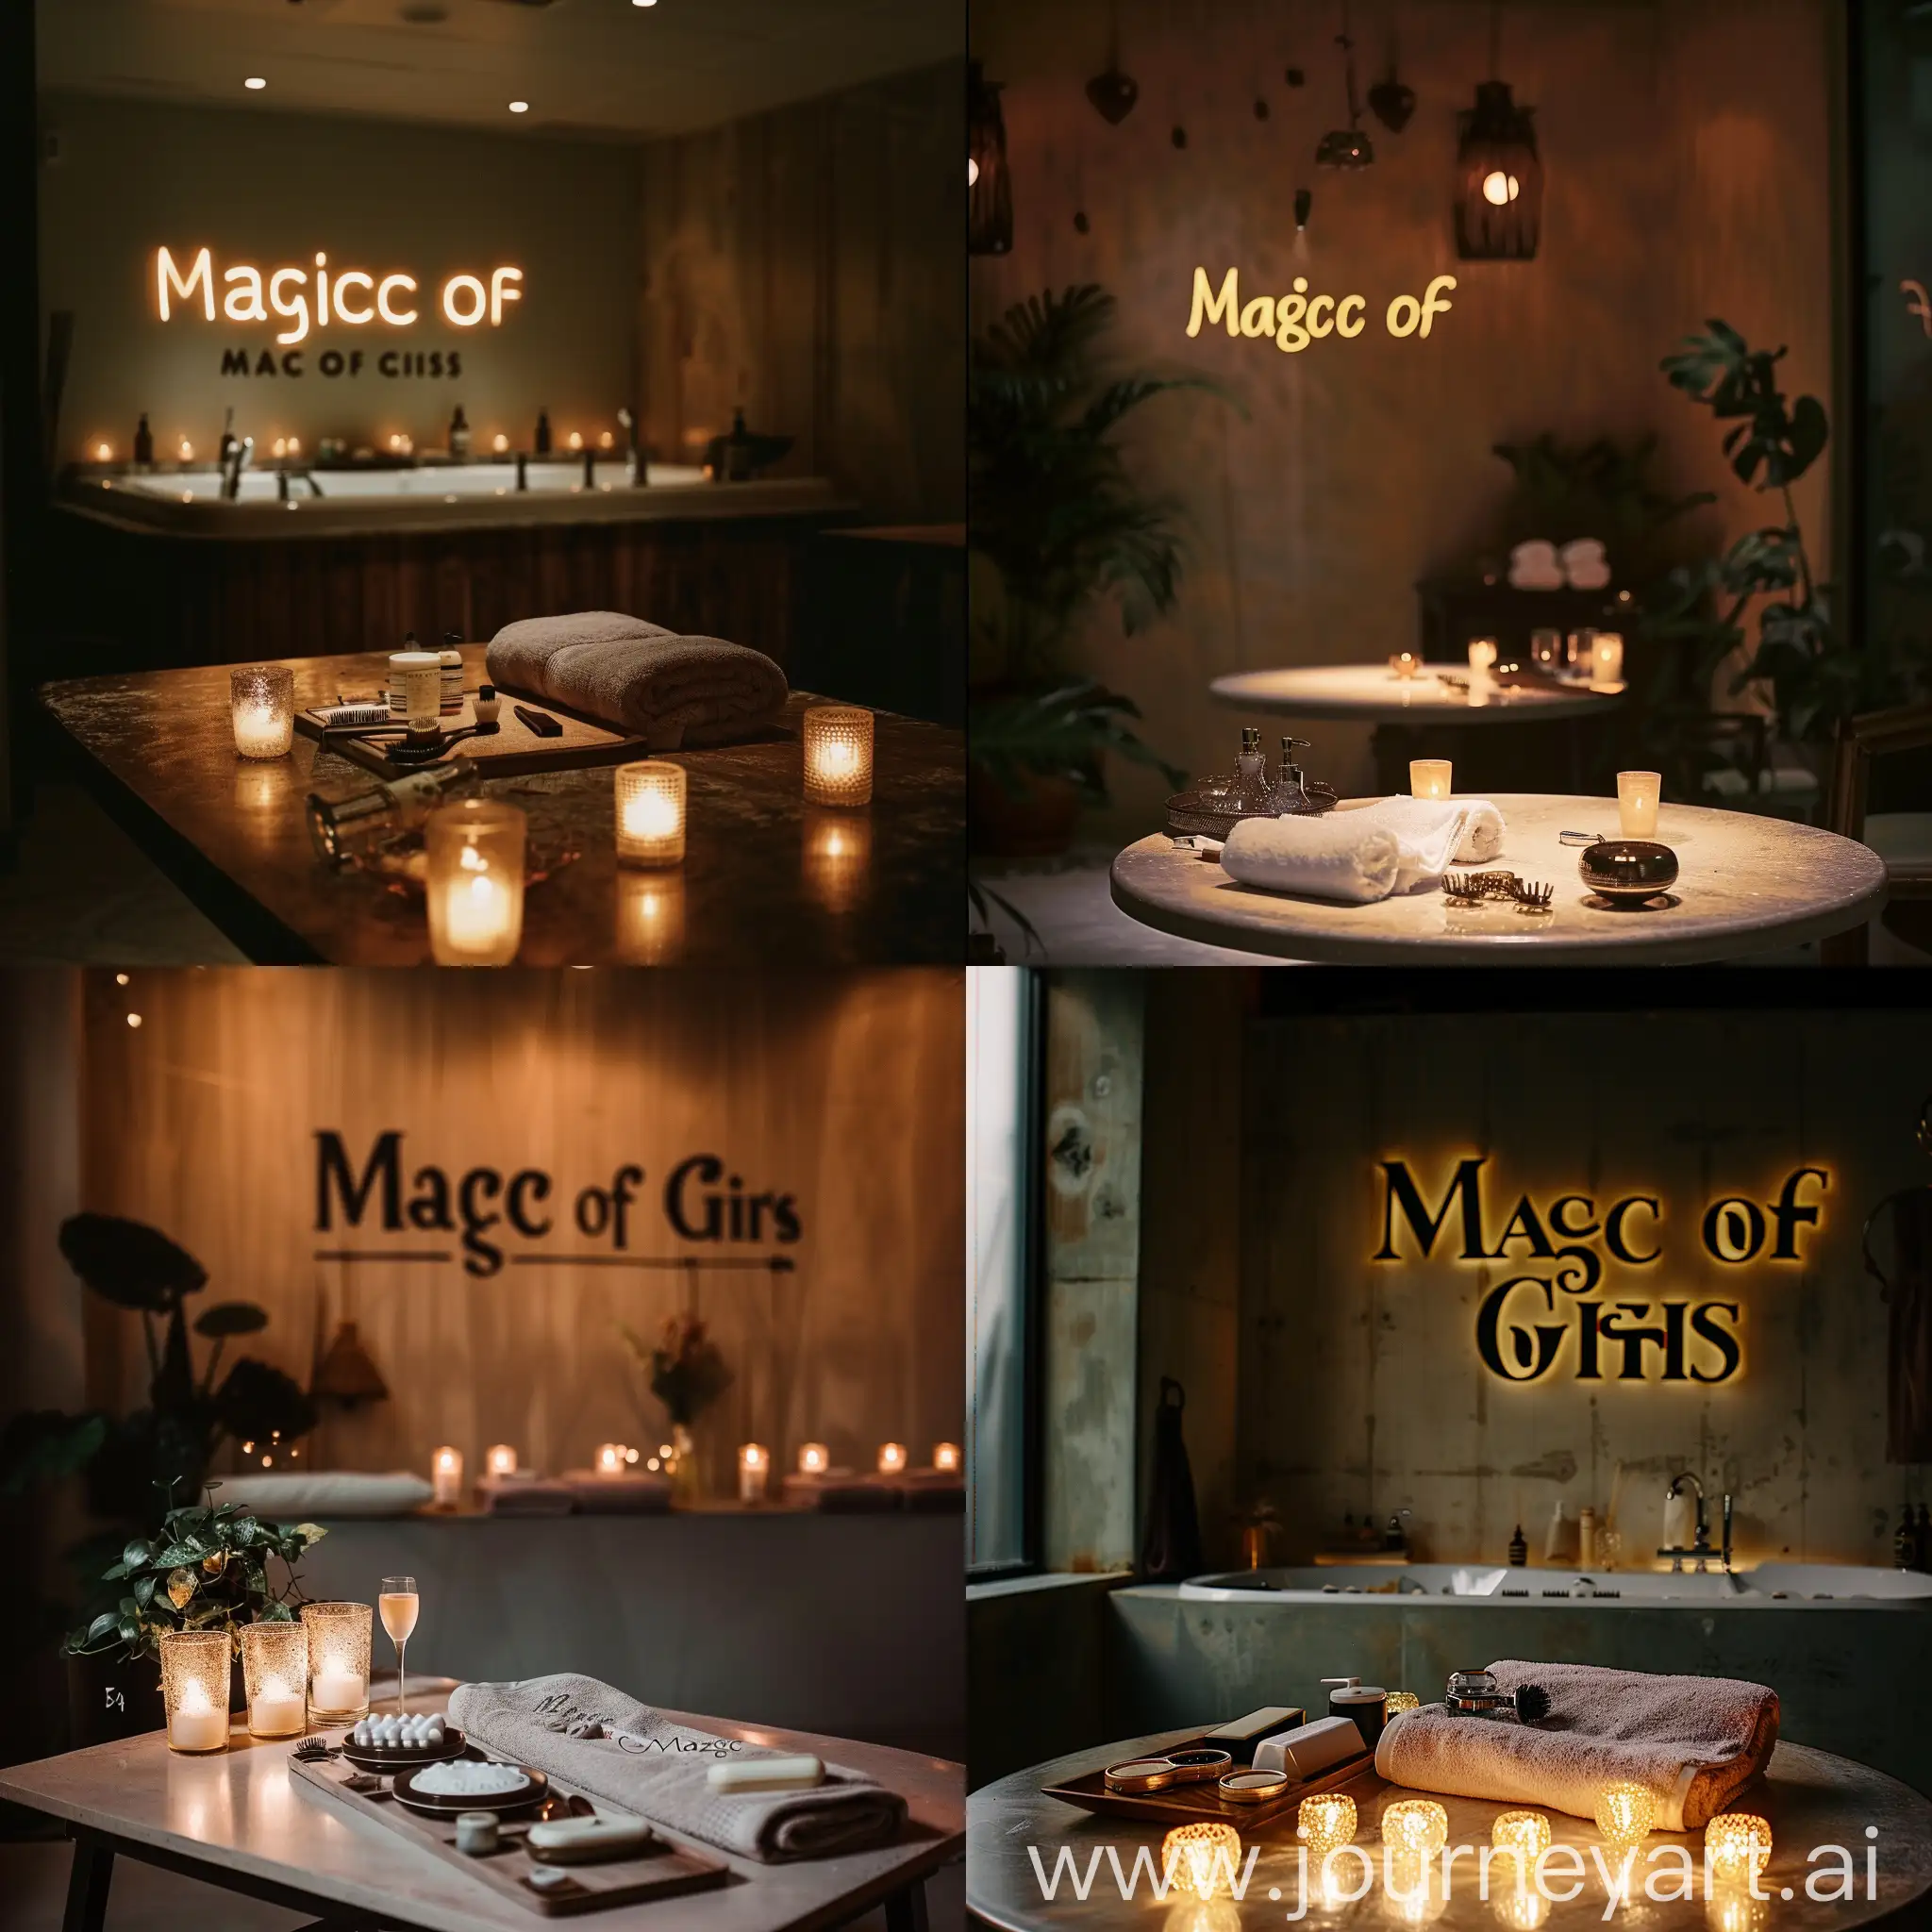 Luxurious-Bath-Set-Displayed-in-Elegant-Room-with-Magic-of-Gifts-Sign